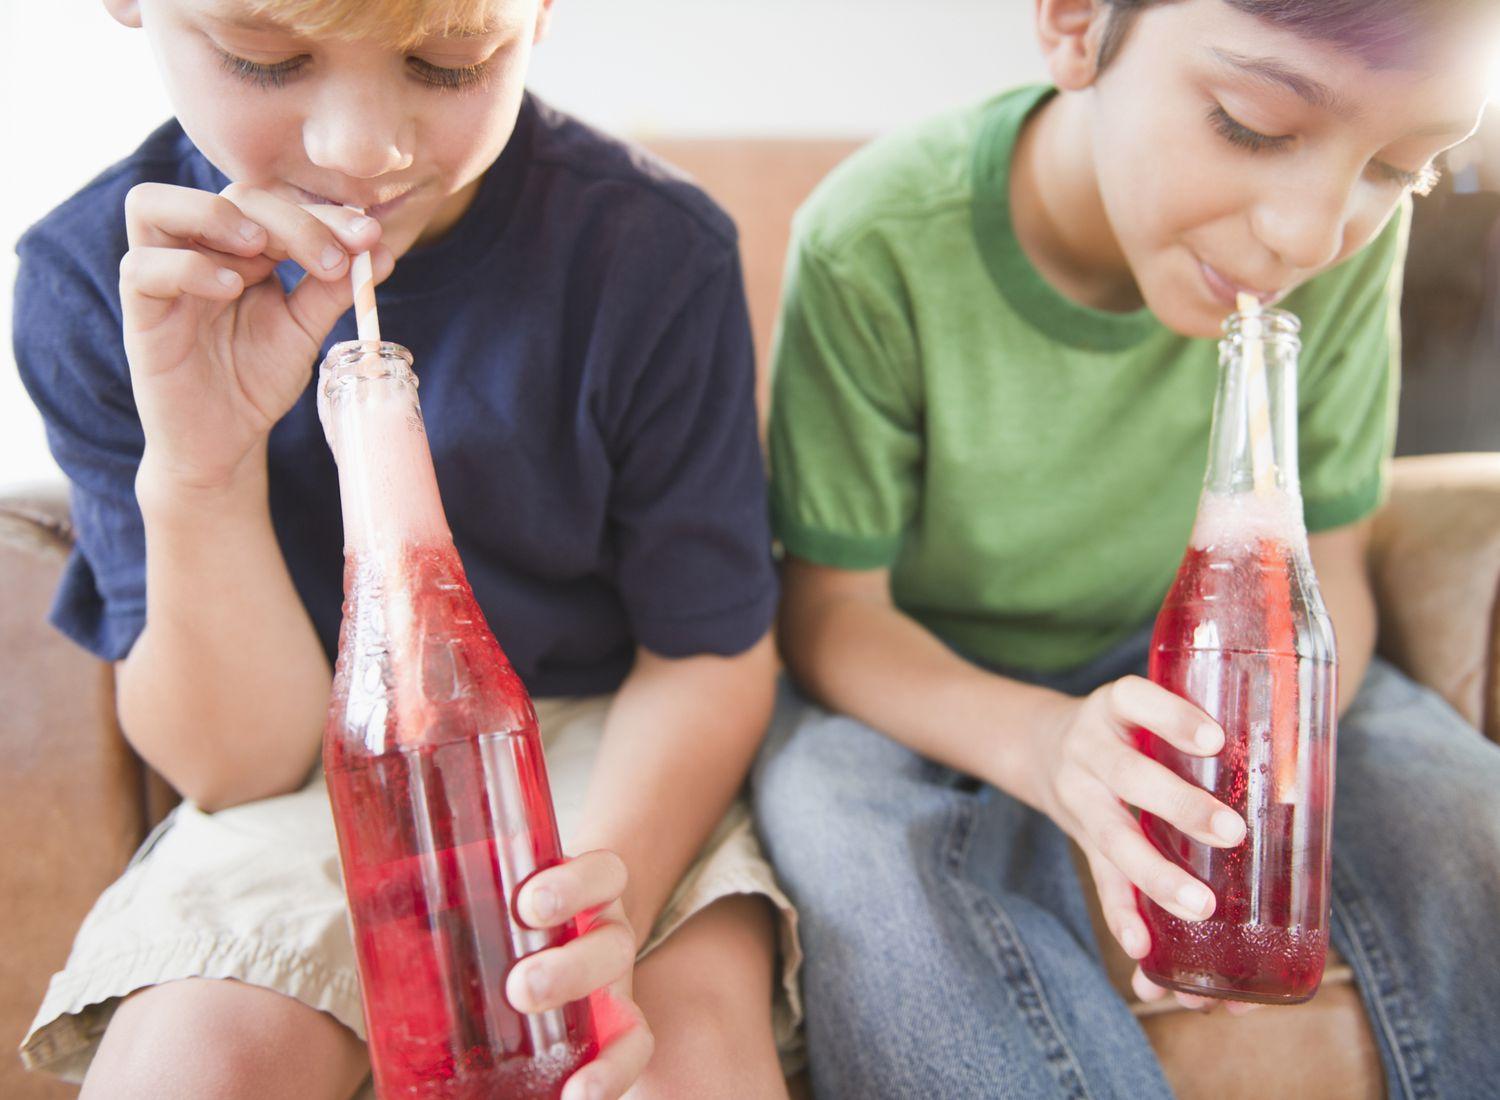 Is There a Link Between Soft Drinks and Aggression in Children?